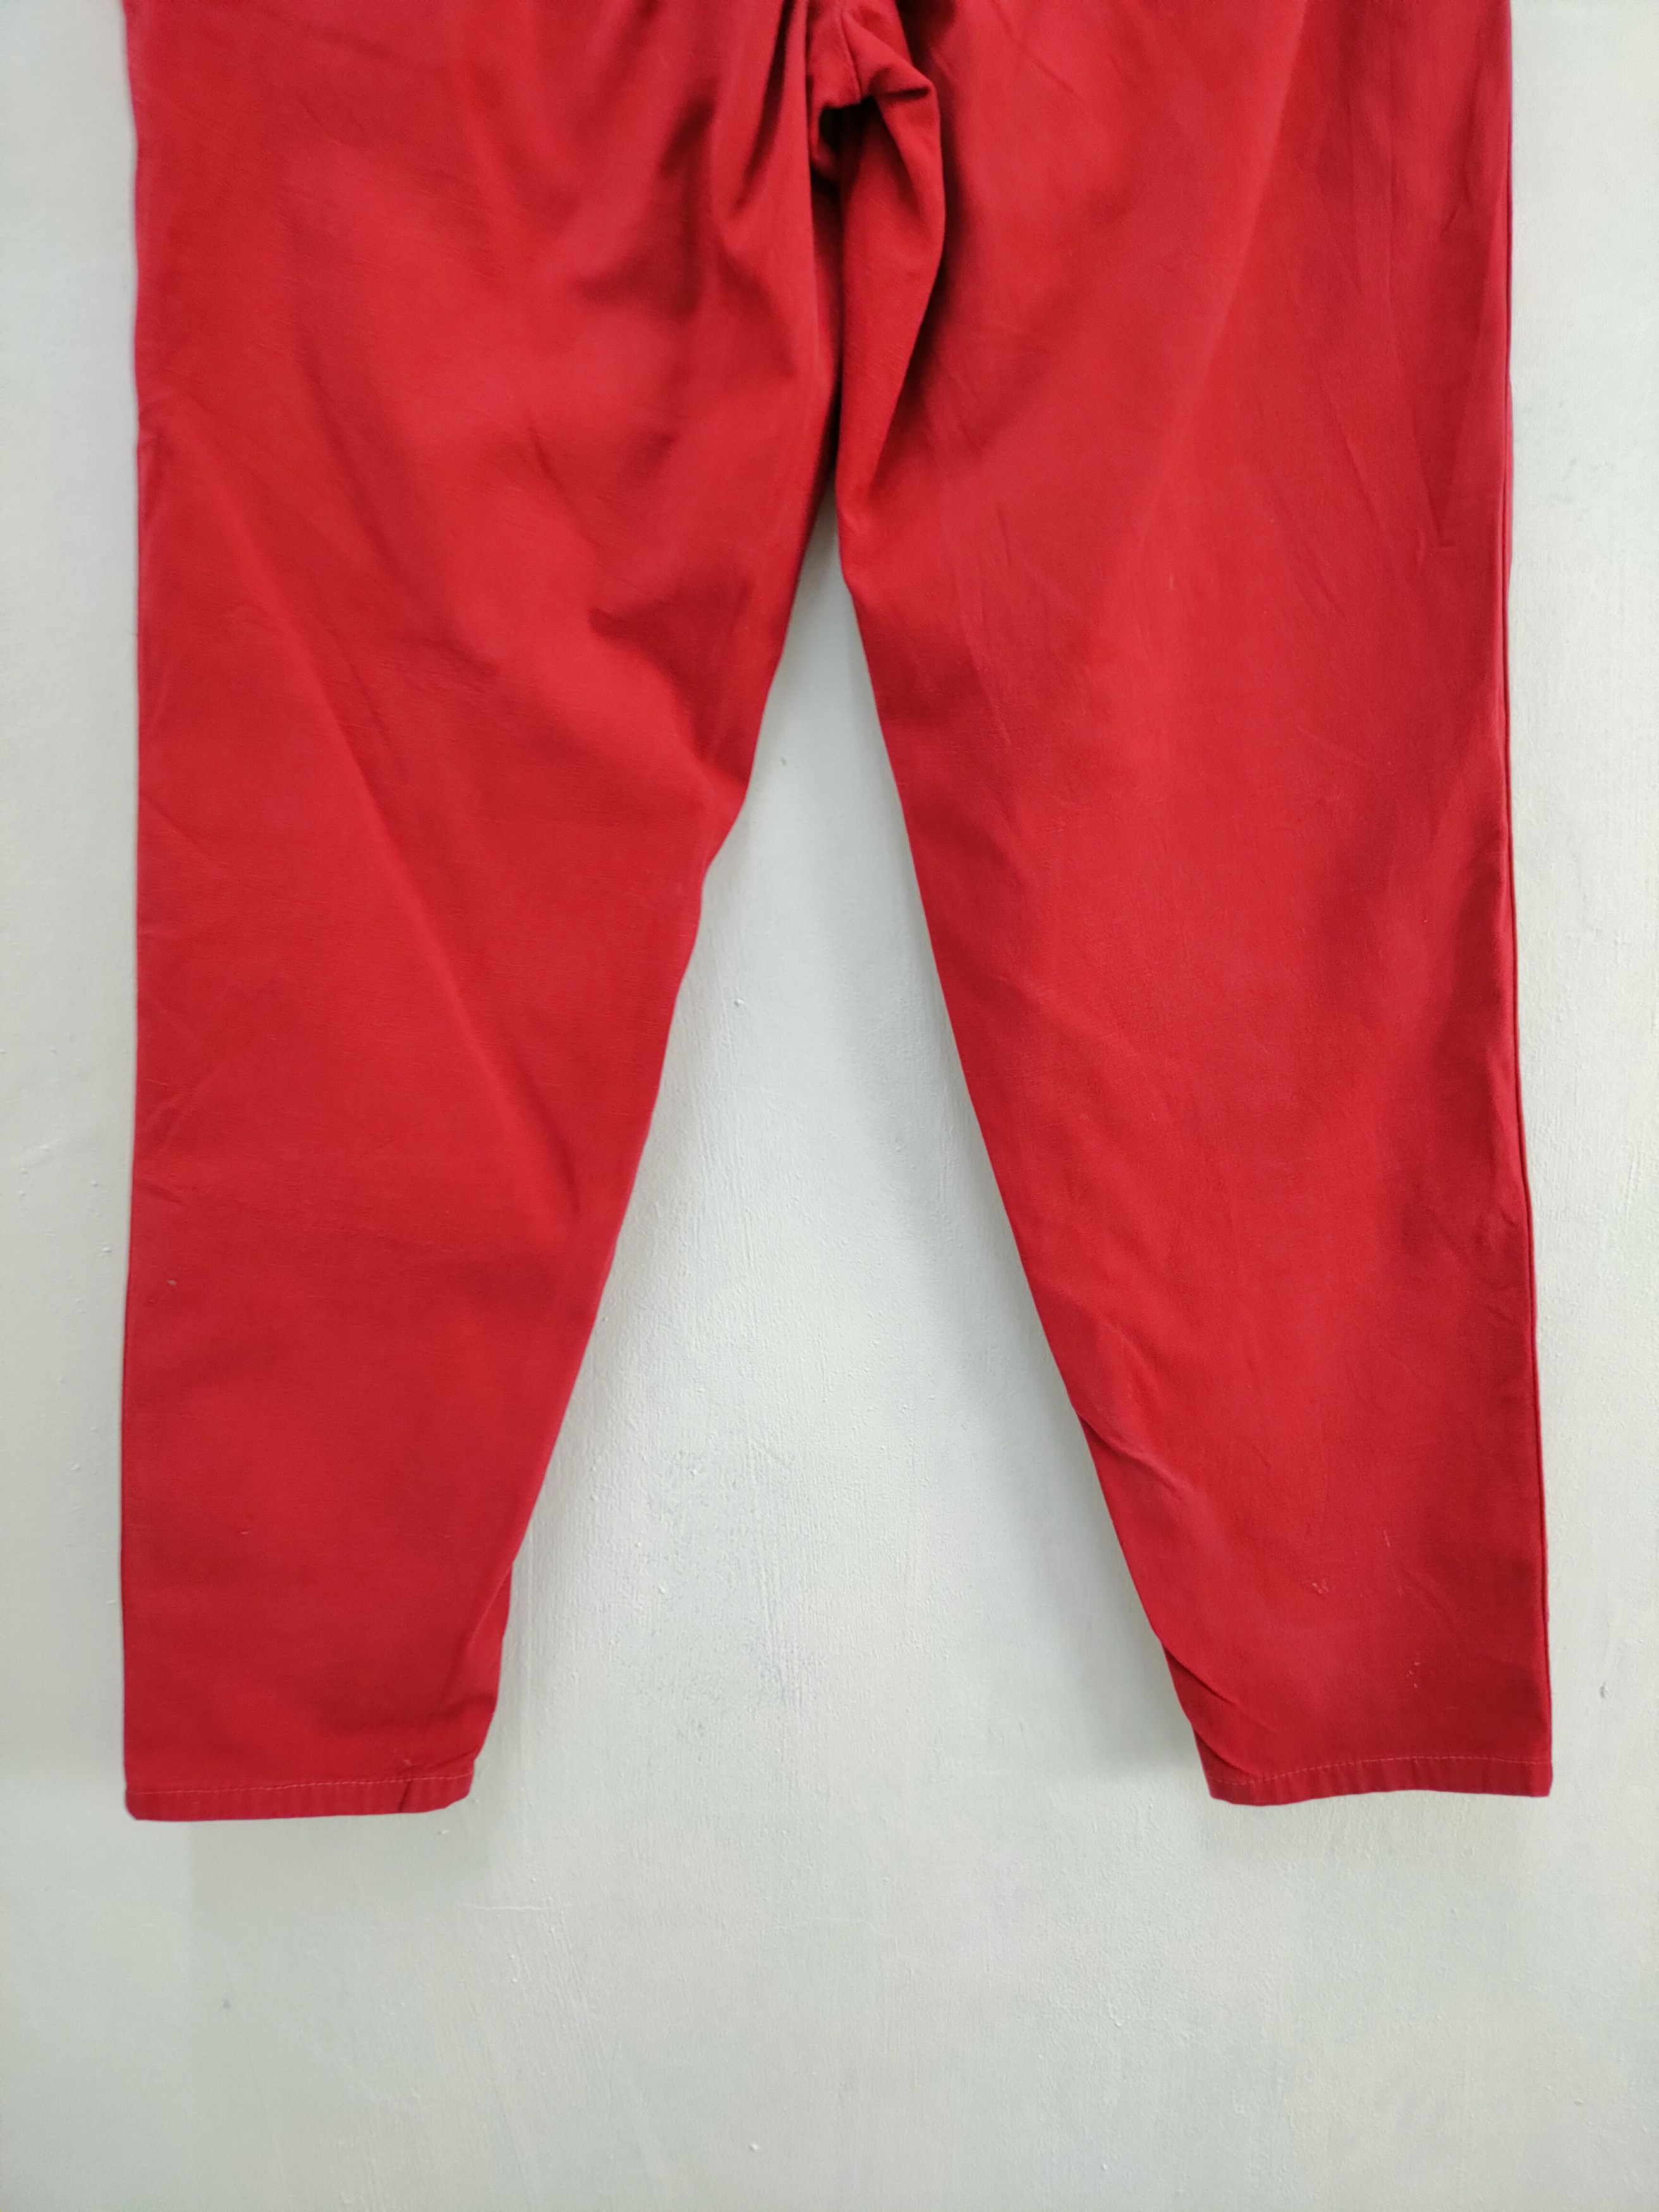 Linea Linea Vicenza Red Pants Made In Japan Size US 26 / EU 42 - 6 Thumbnail